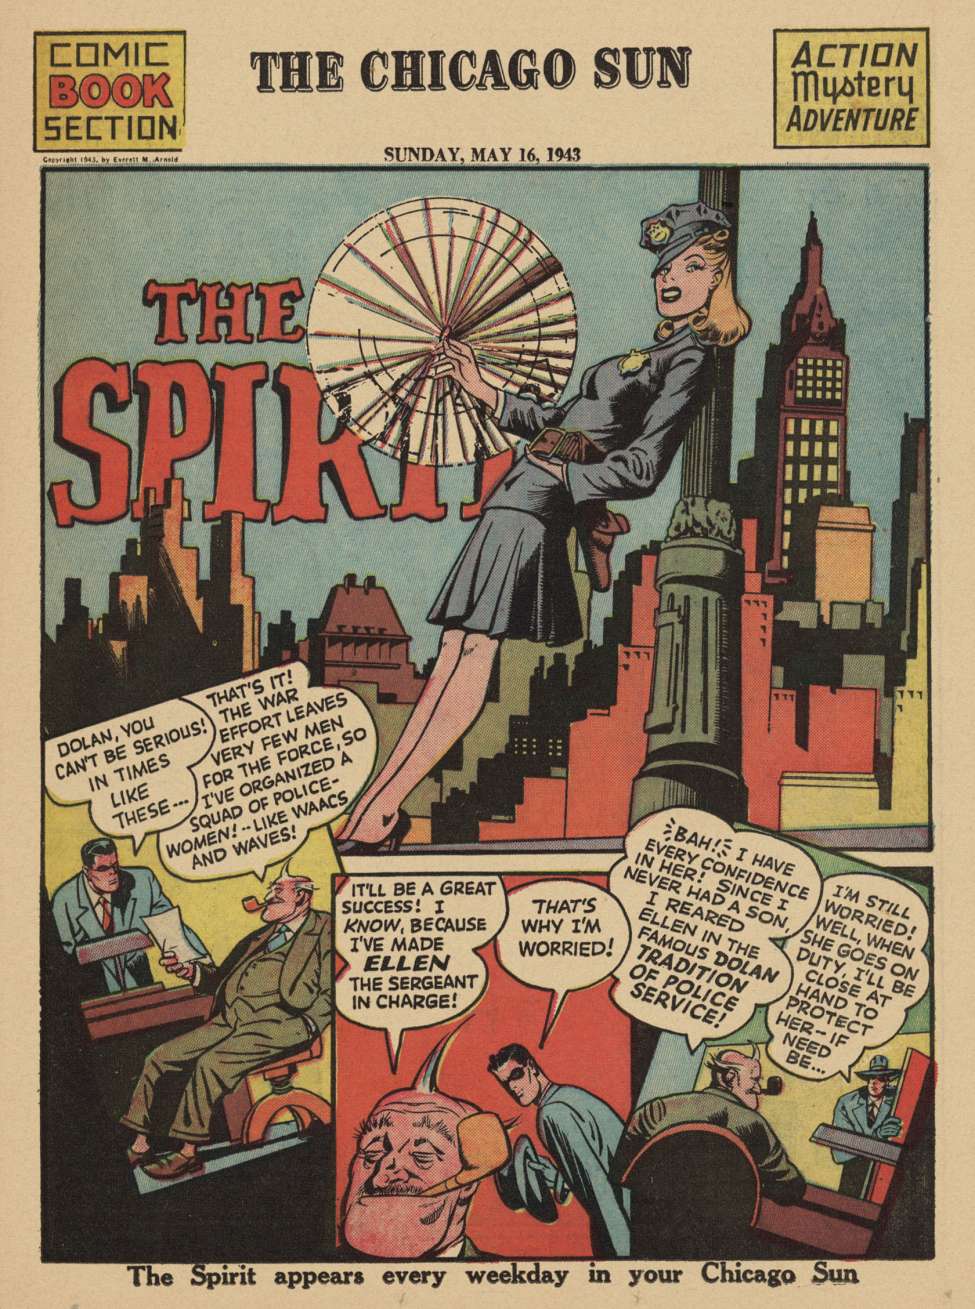 Book Cover For The Spirit (1943-05-16) - Chicago Sun